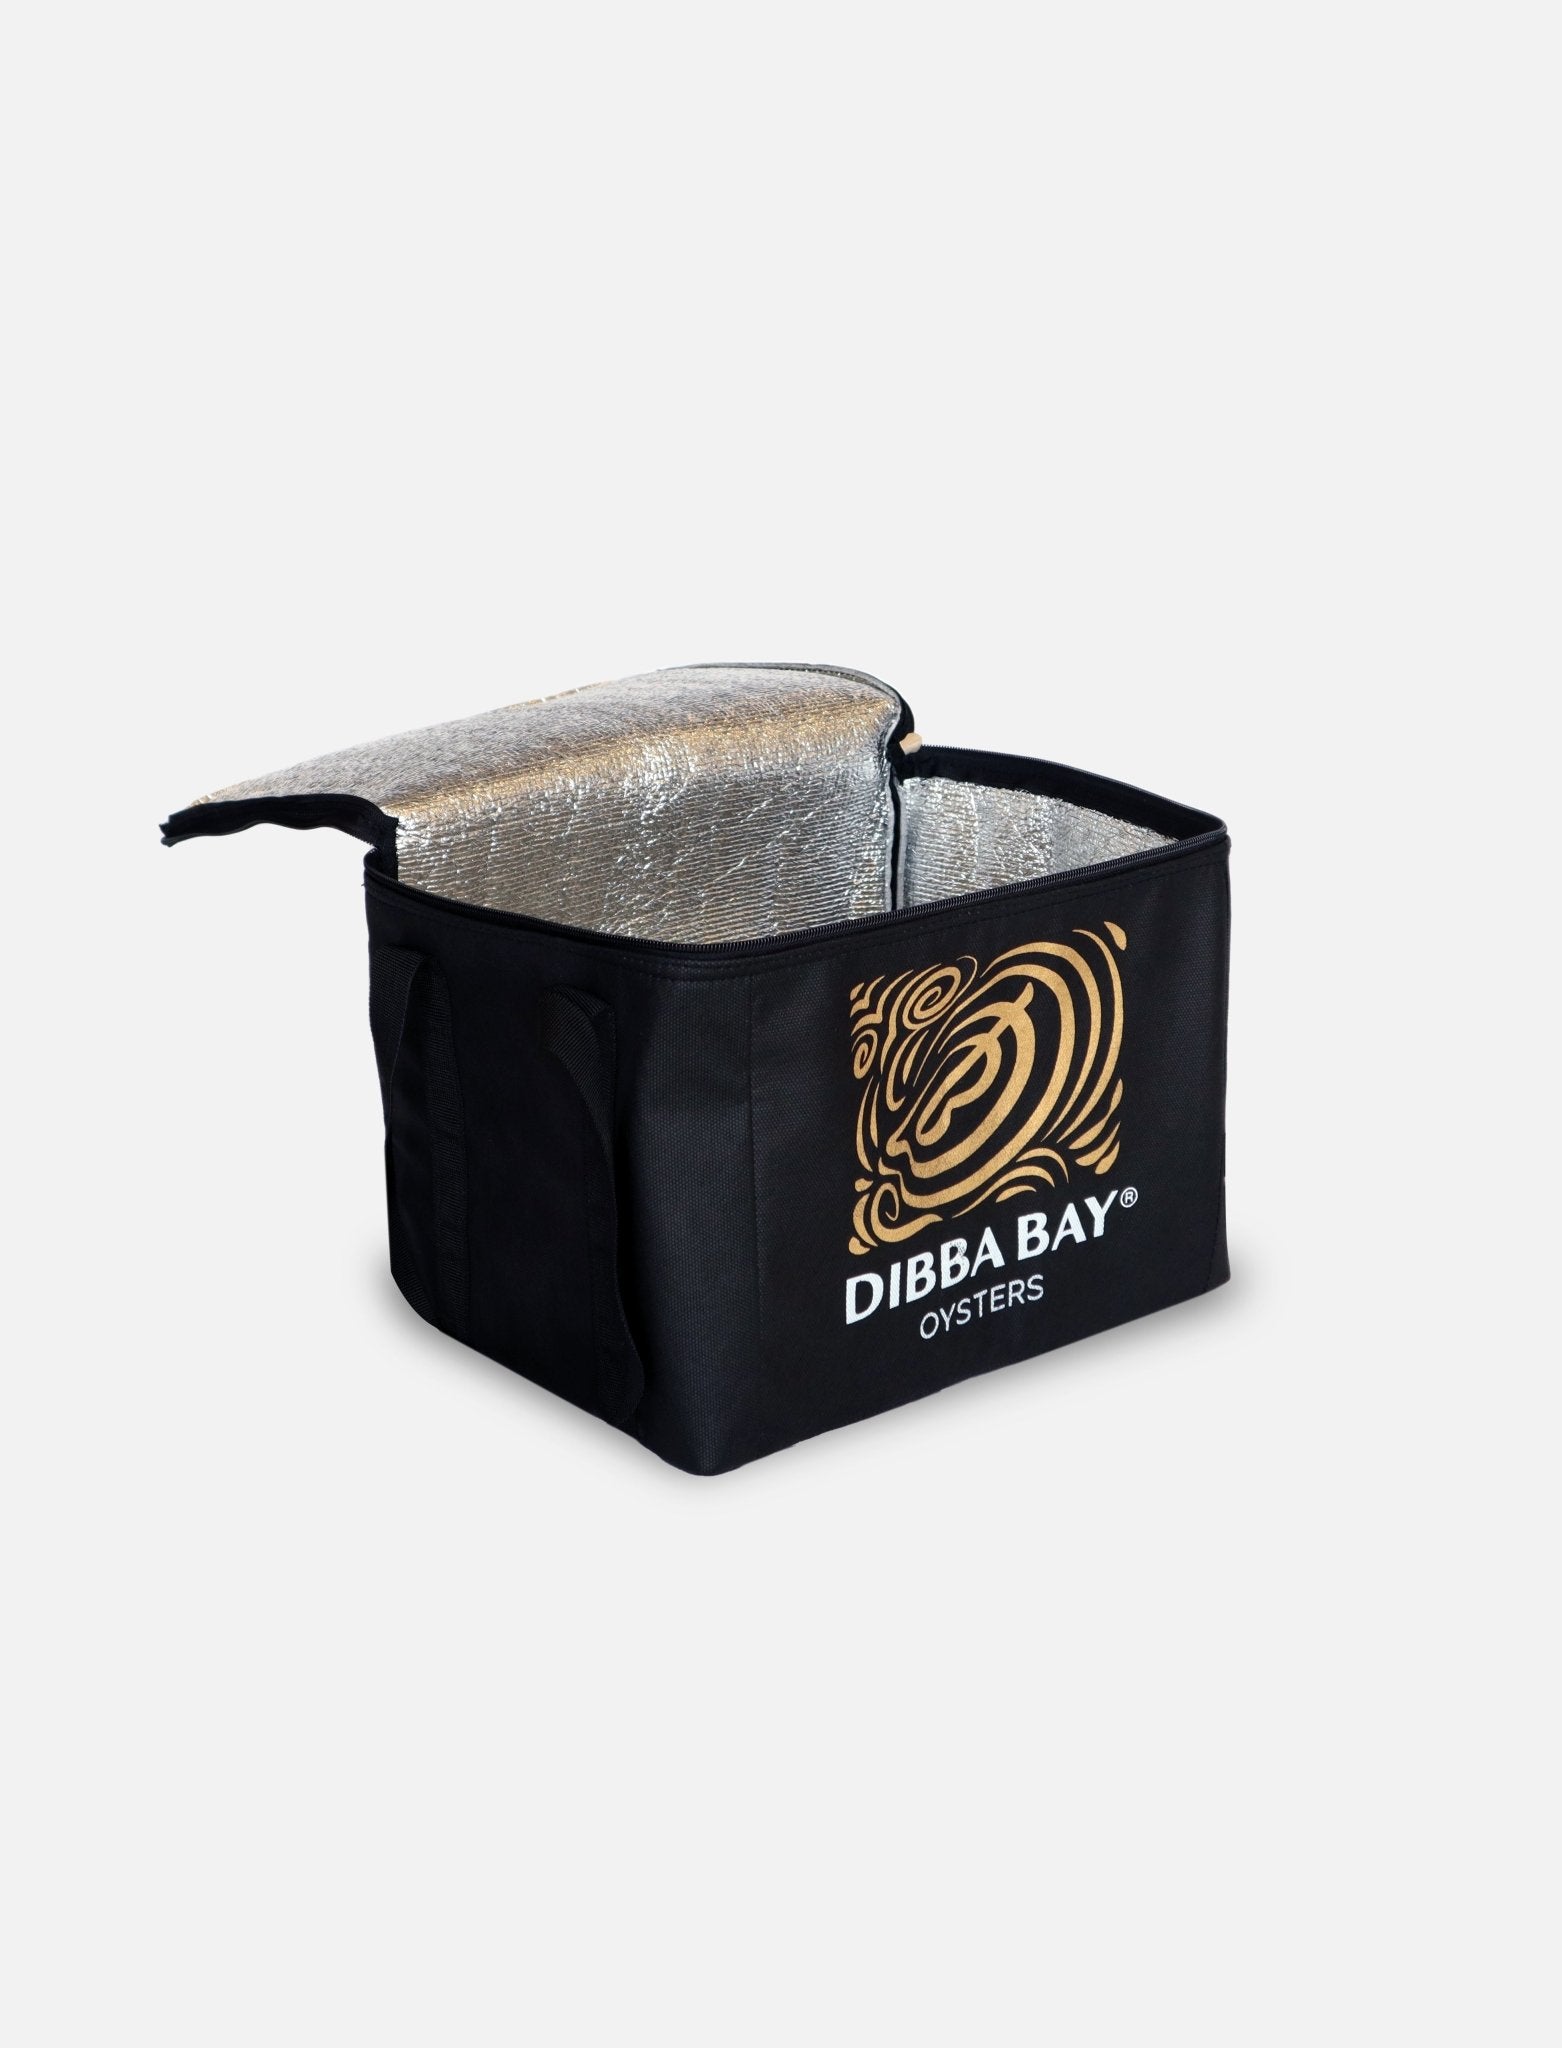 5L Cooler Promo Bag (24 x 18 x 15 cm) - thermabags